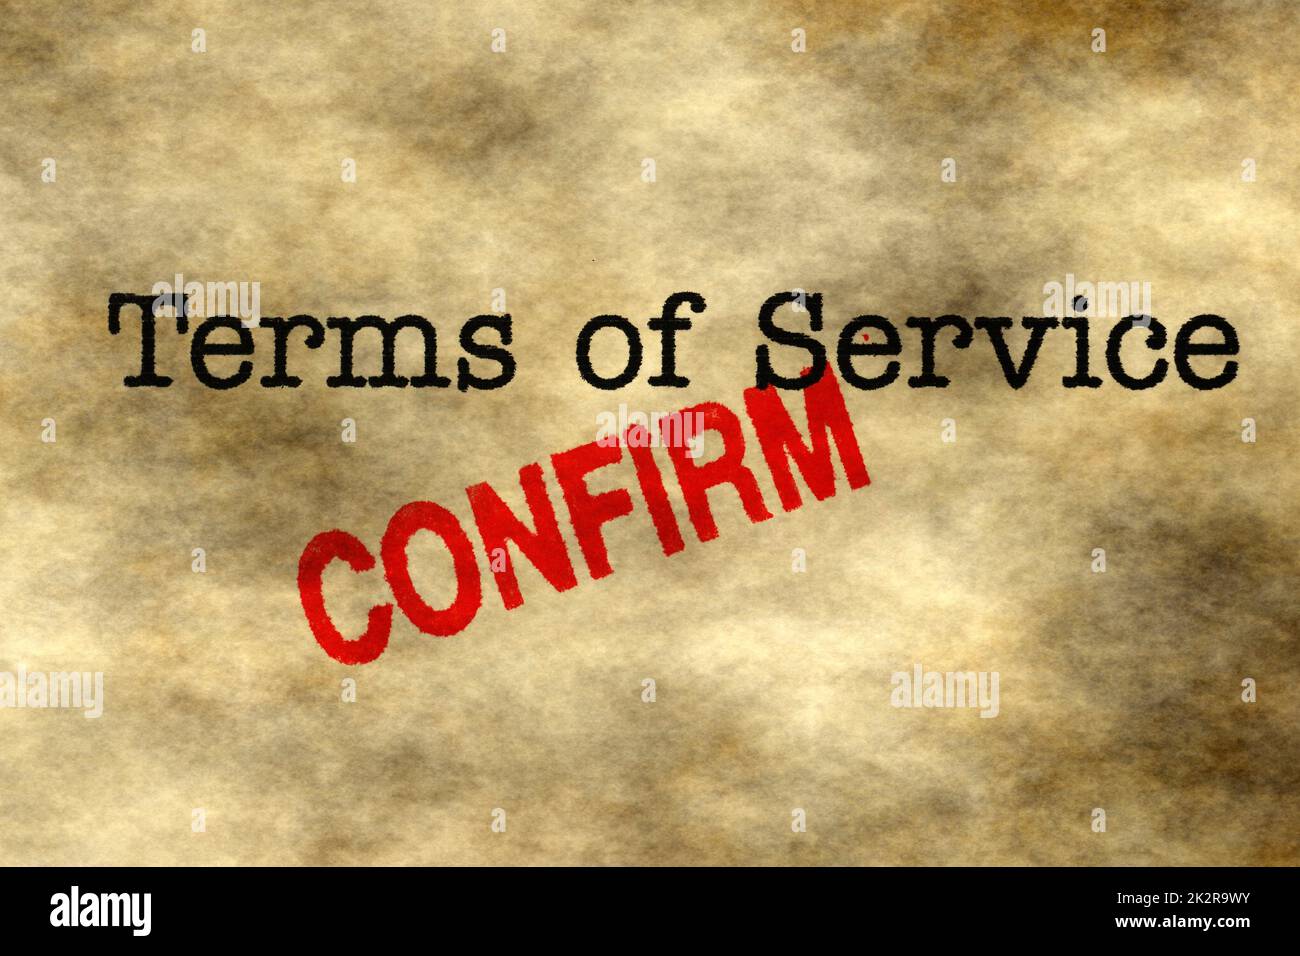 Terms of service - confirm Stock Photo